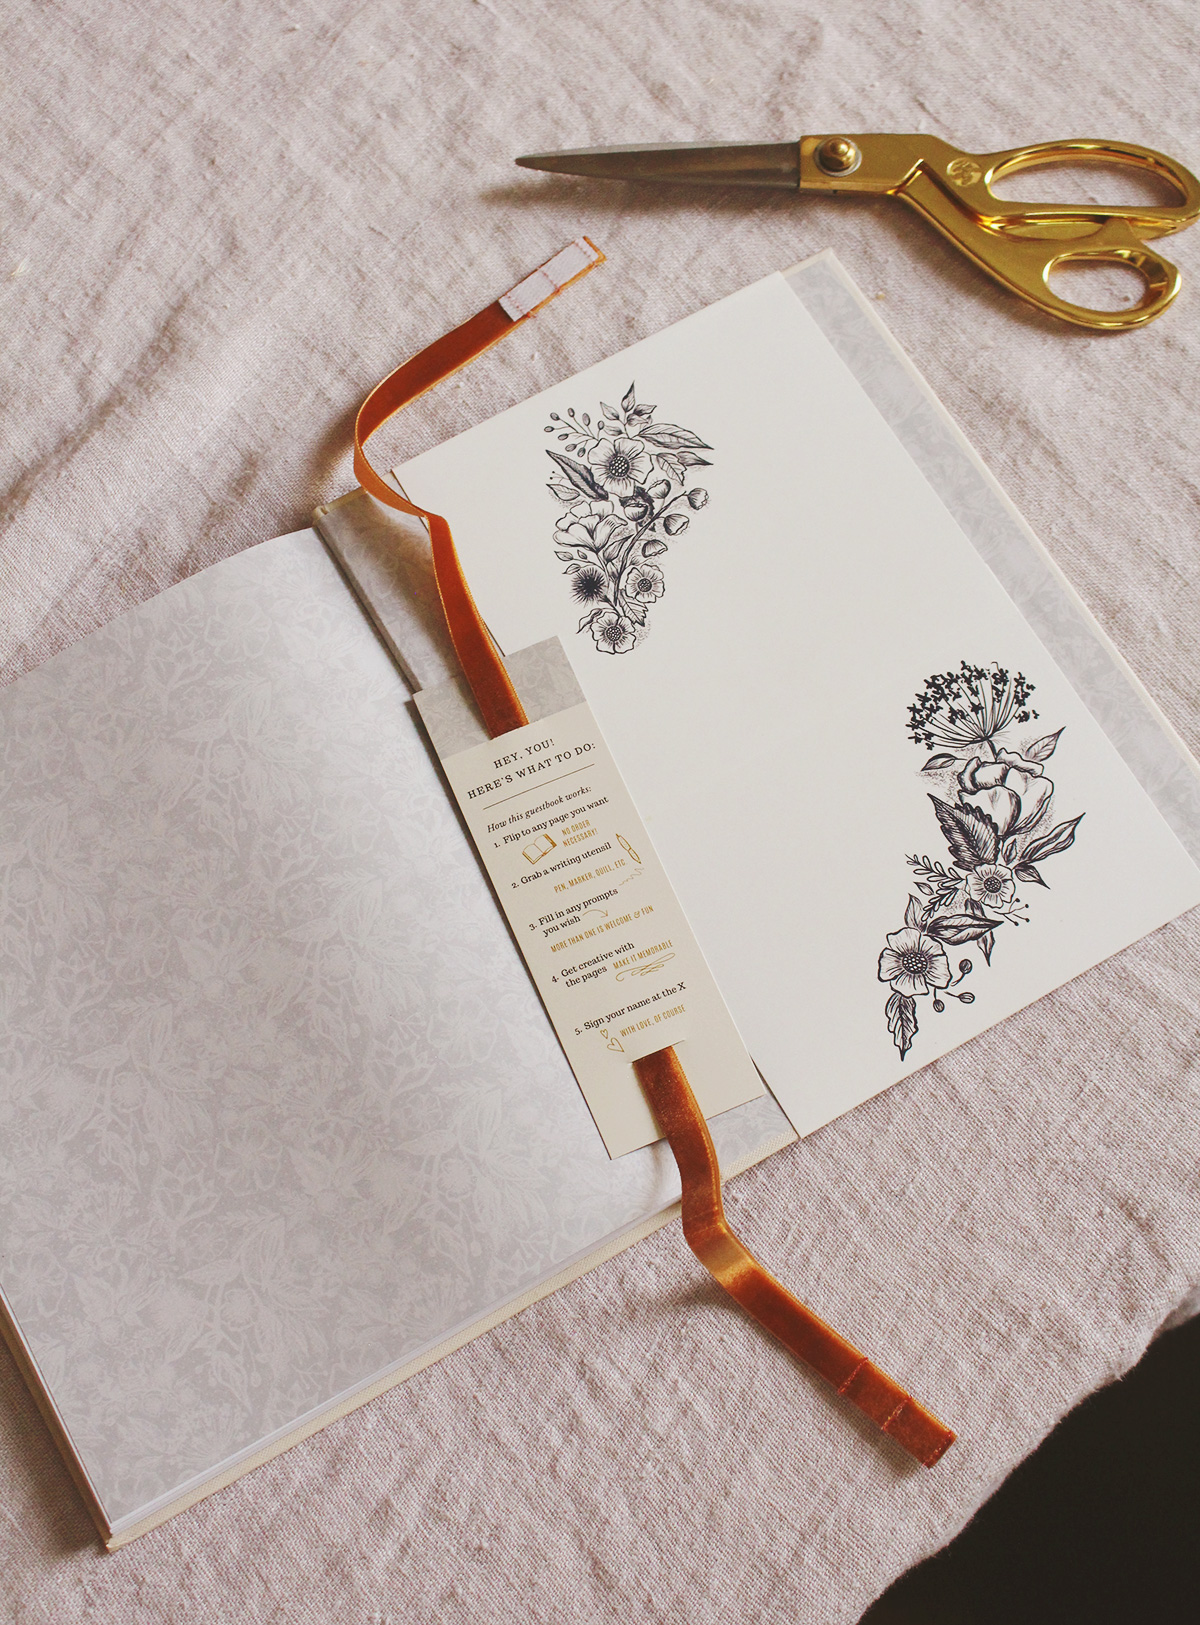 How To Use The Bookmark in Your L&V Wedding Guestbook